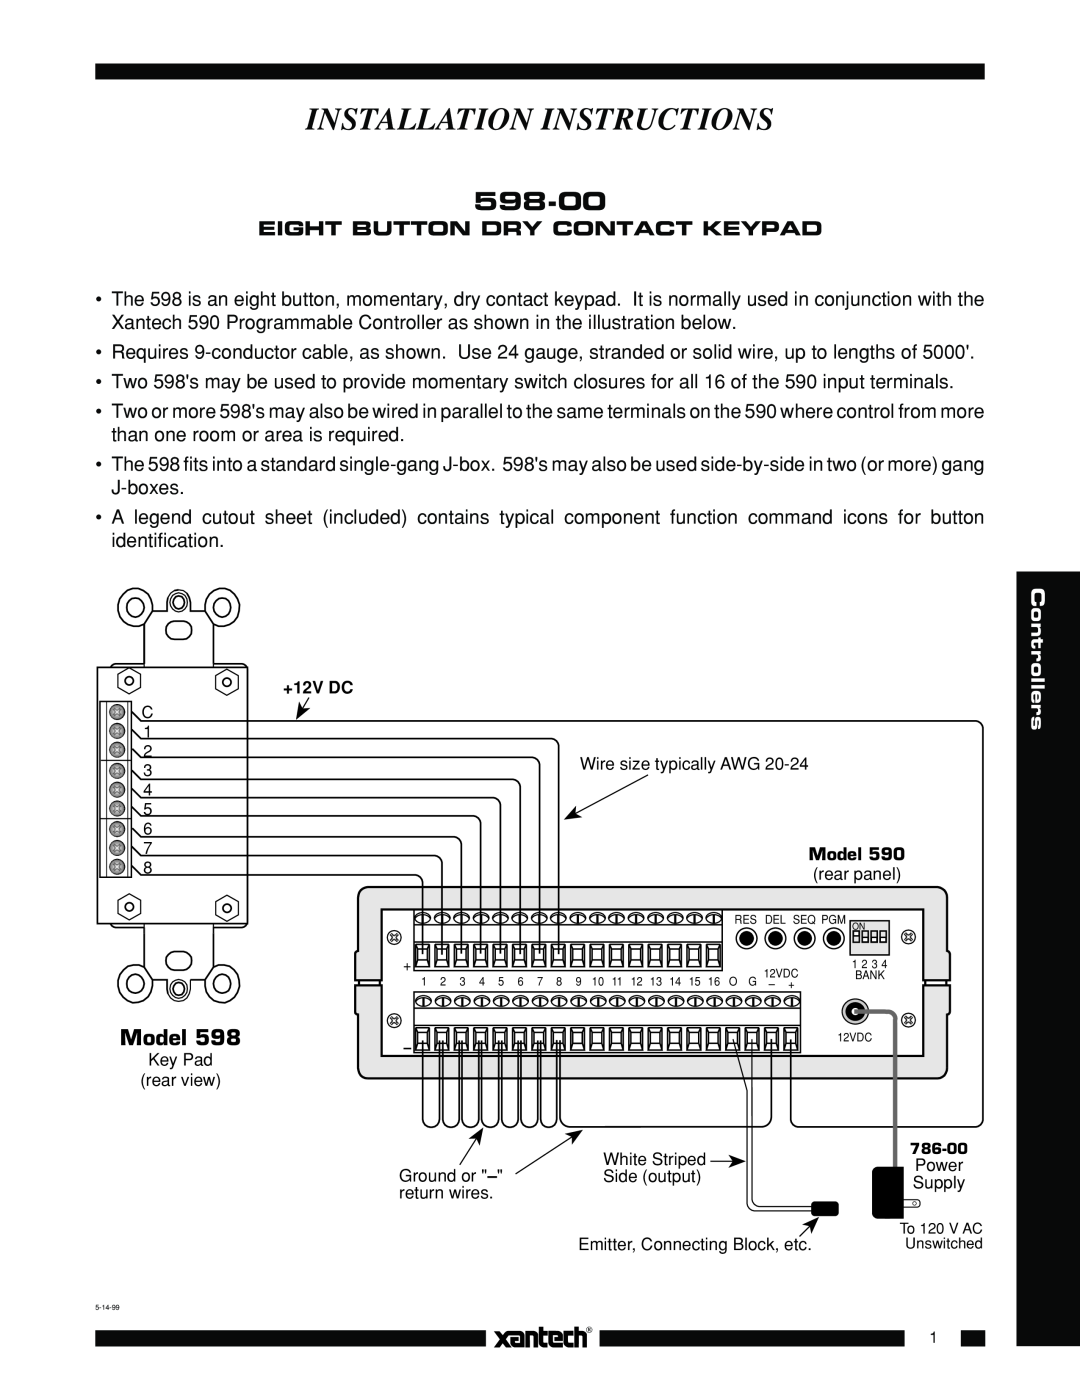 Xantech 598-00 installation instructions Installation Instructions, Model, Eight Button Dry Contact Keypad 